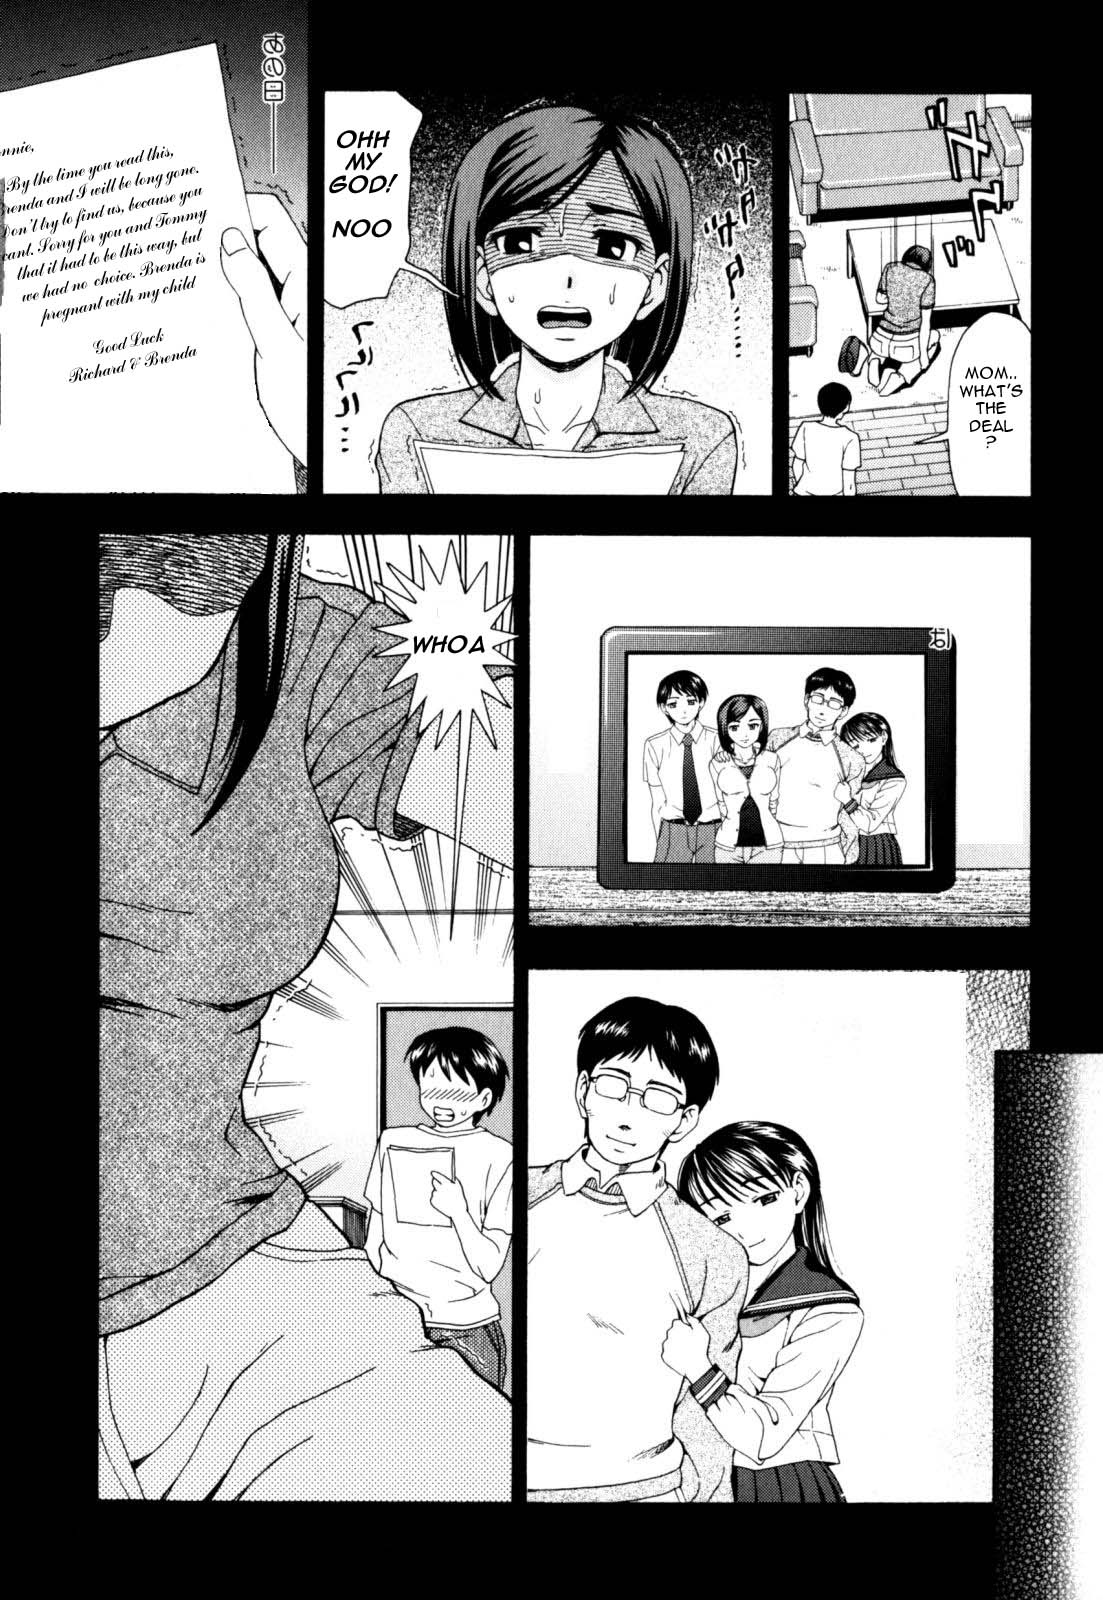 Tit for Tat for Tommy [English] [Rewrite] [olddog51] page 1 full